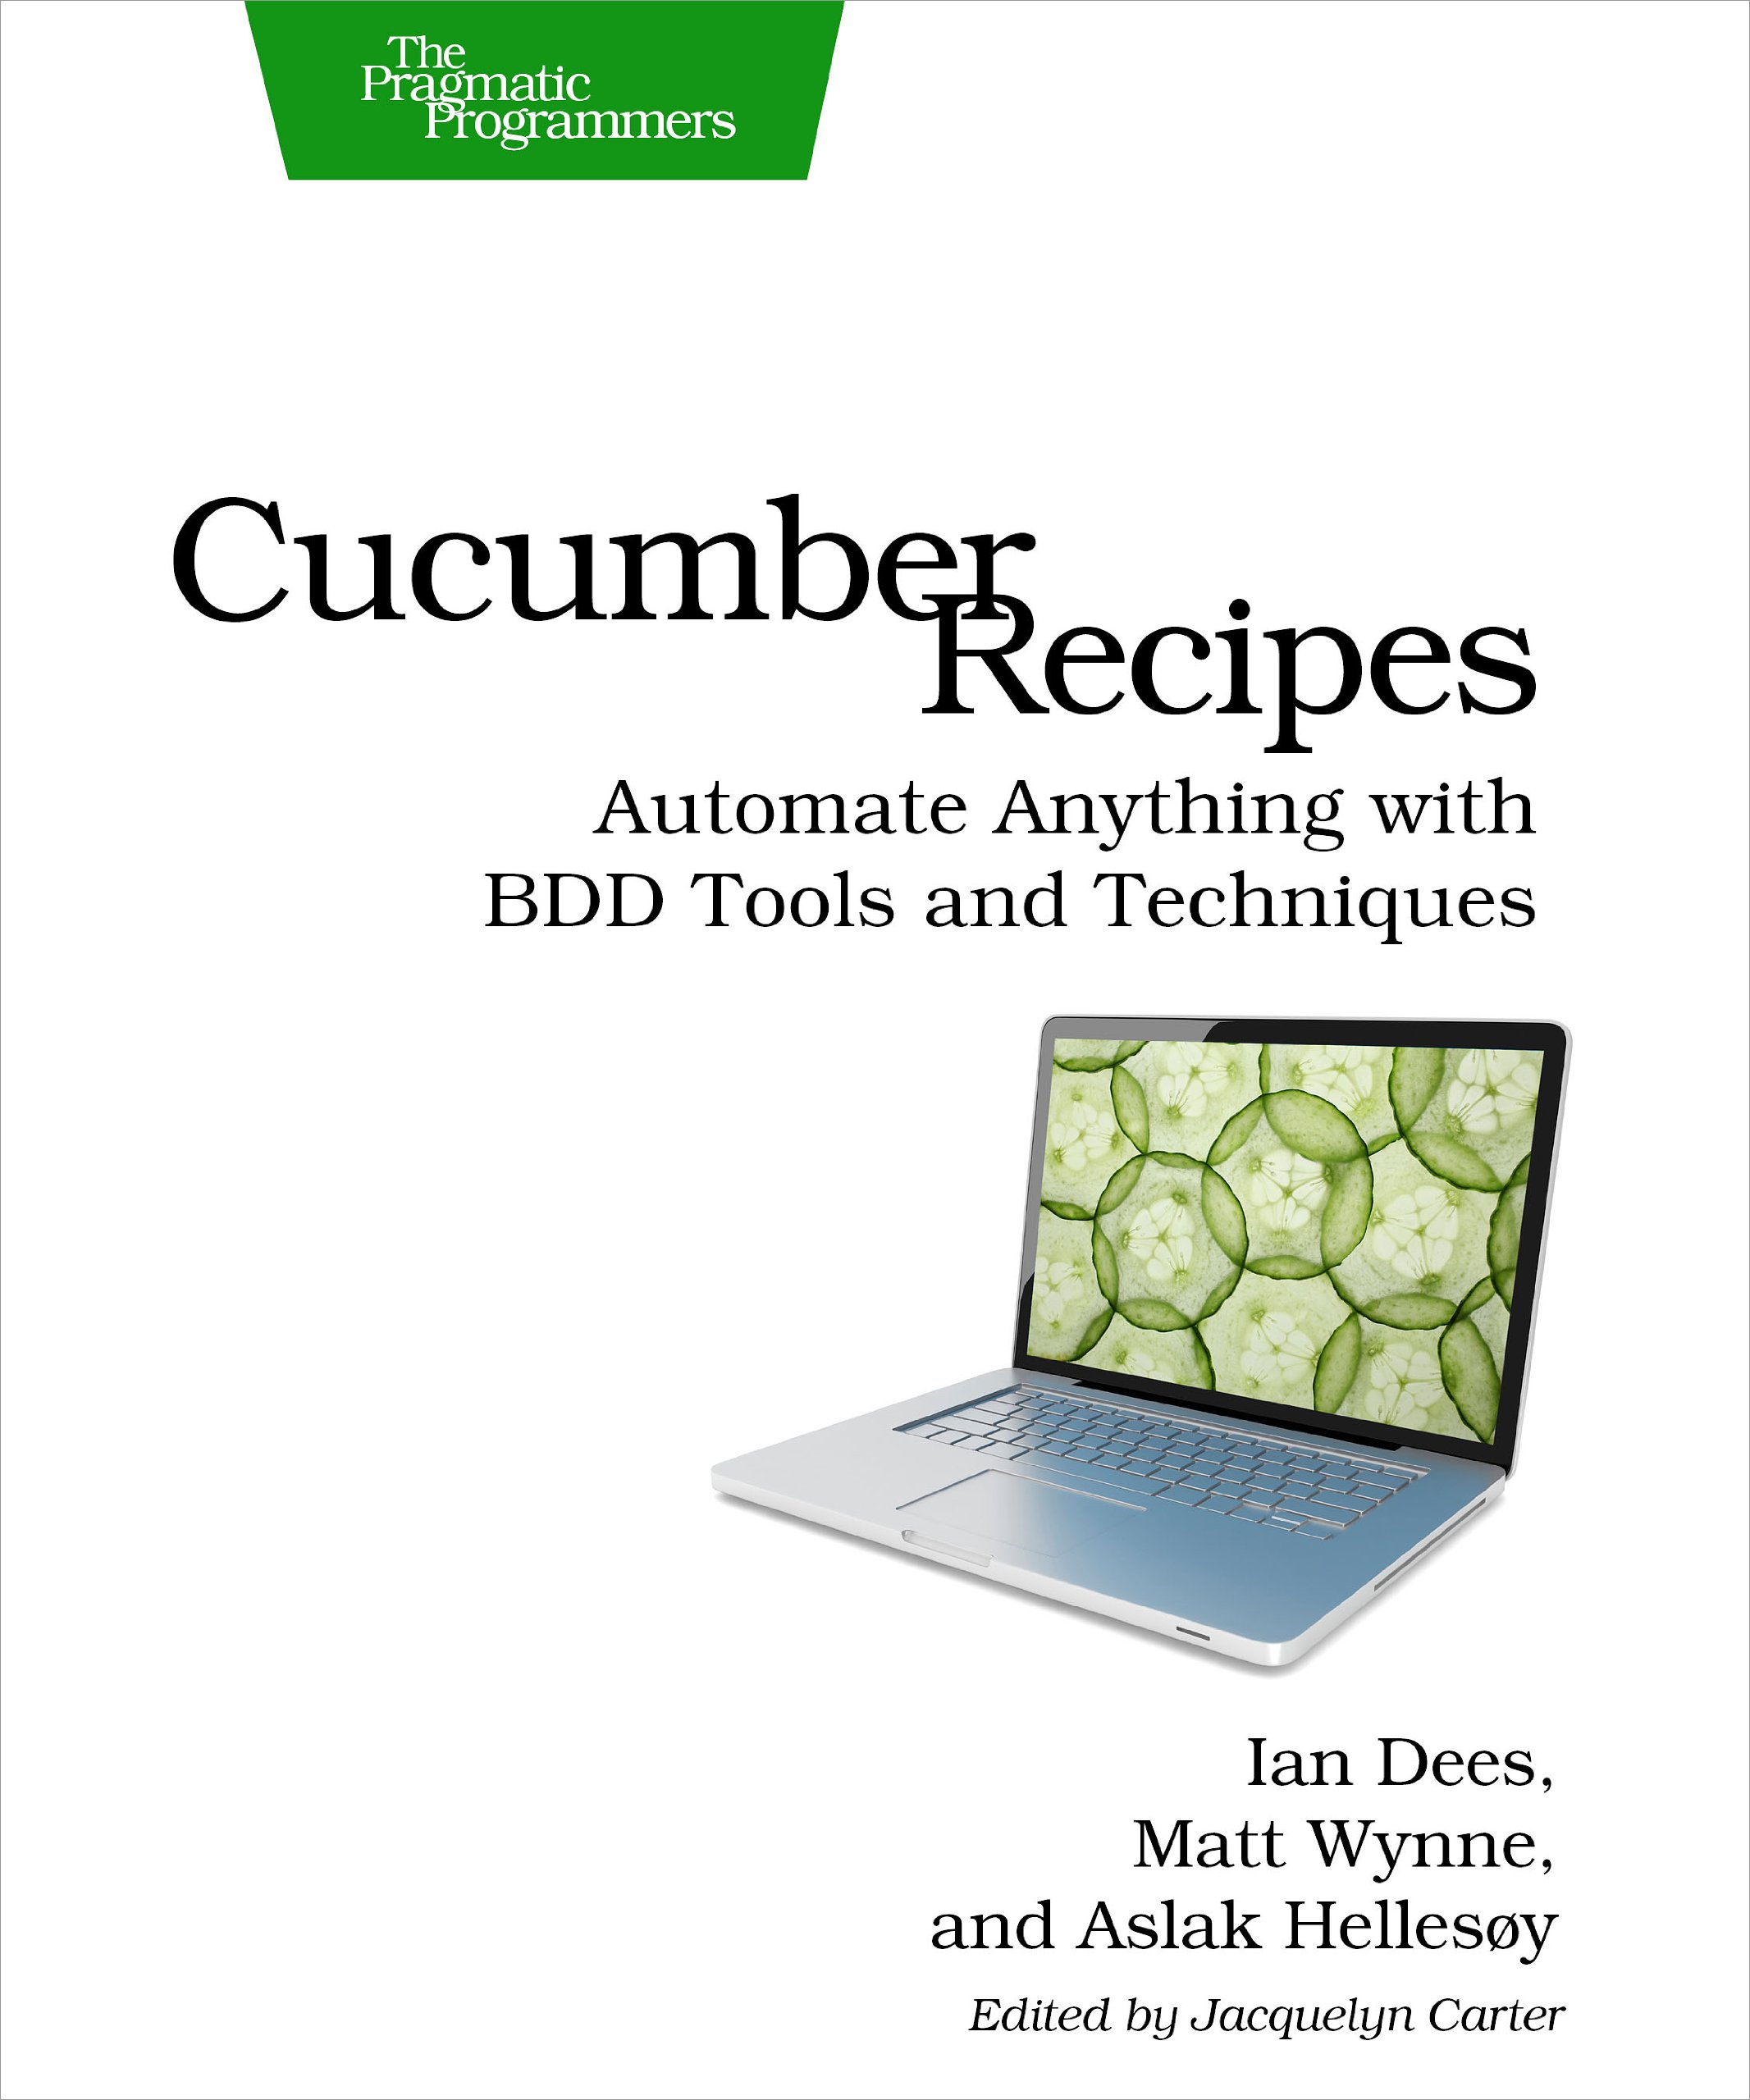 Cucumber Recipes: Automate Anything with BDD Tools and Techniques (Pragmatic Programmers)